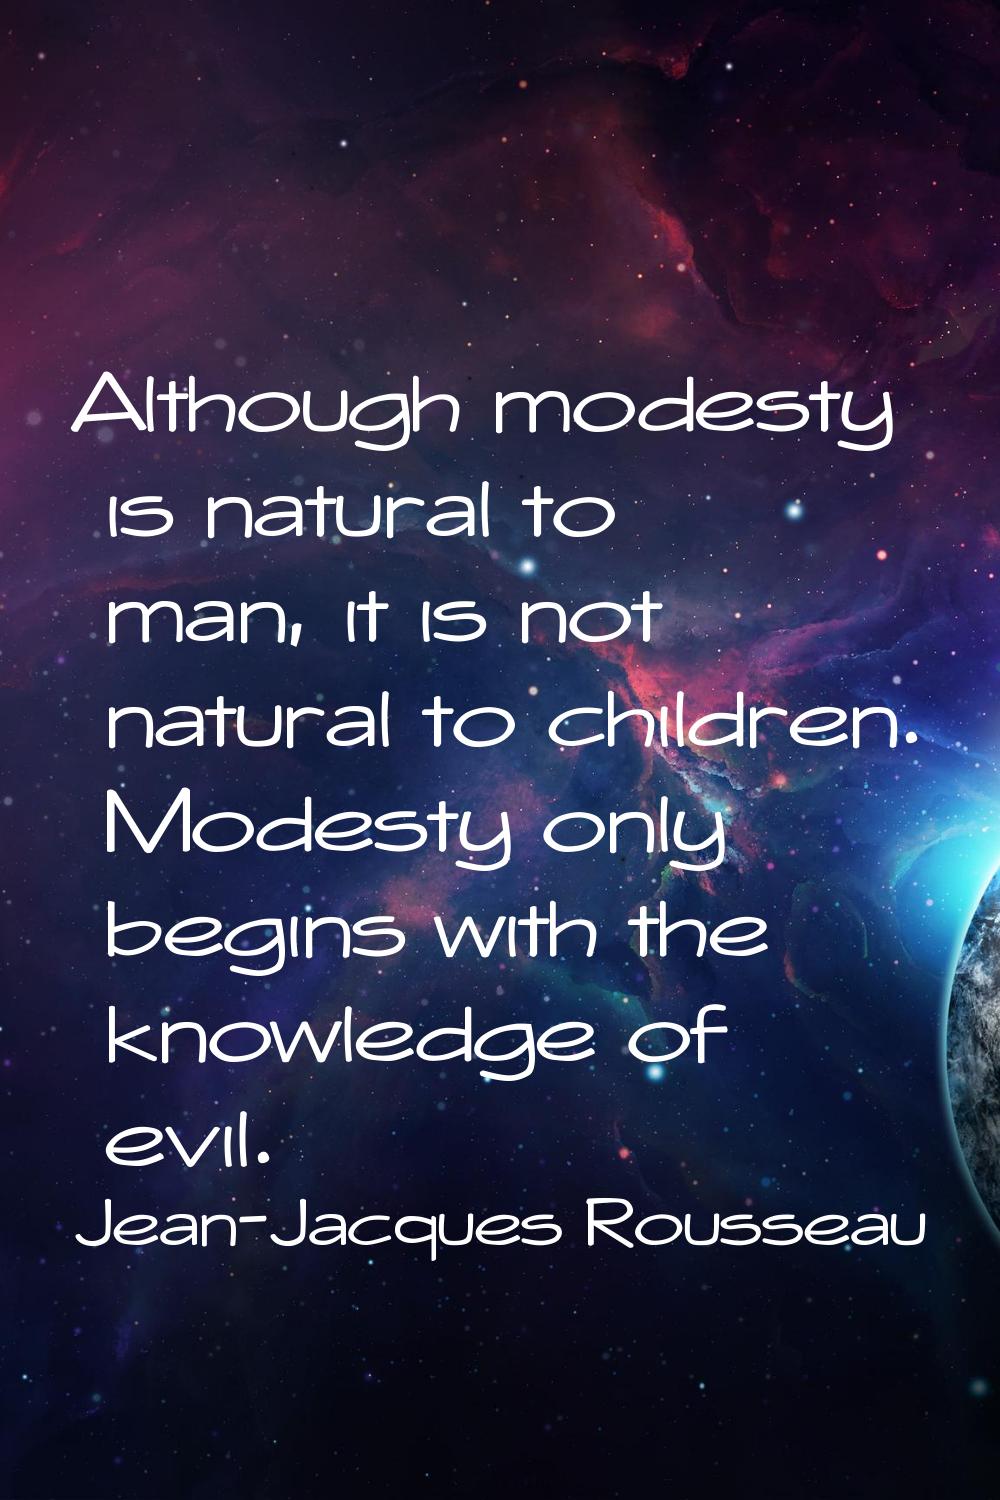 Although modesty is natural to man, it is not natural to children. Modesty only begins with the kno